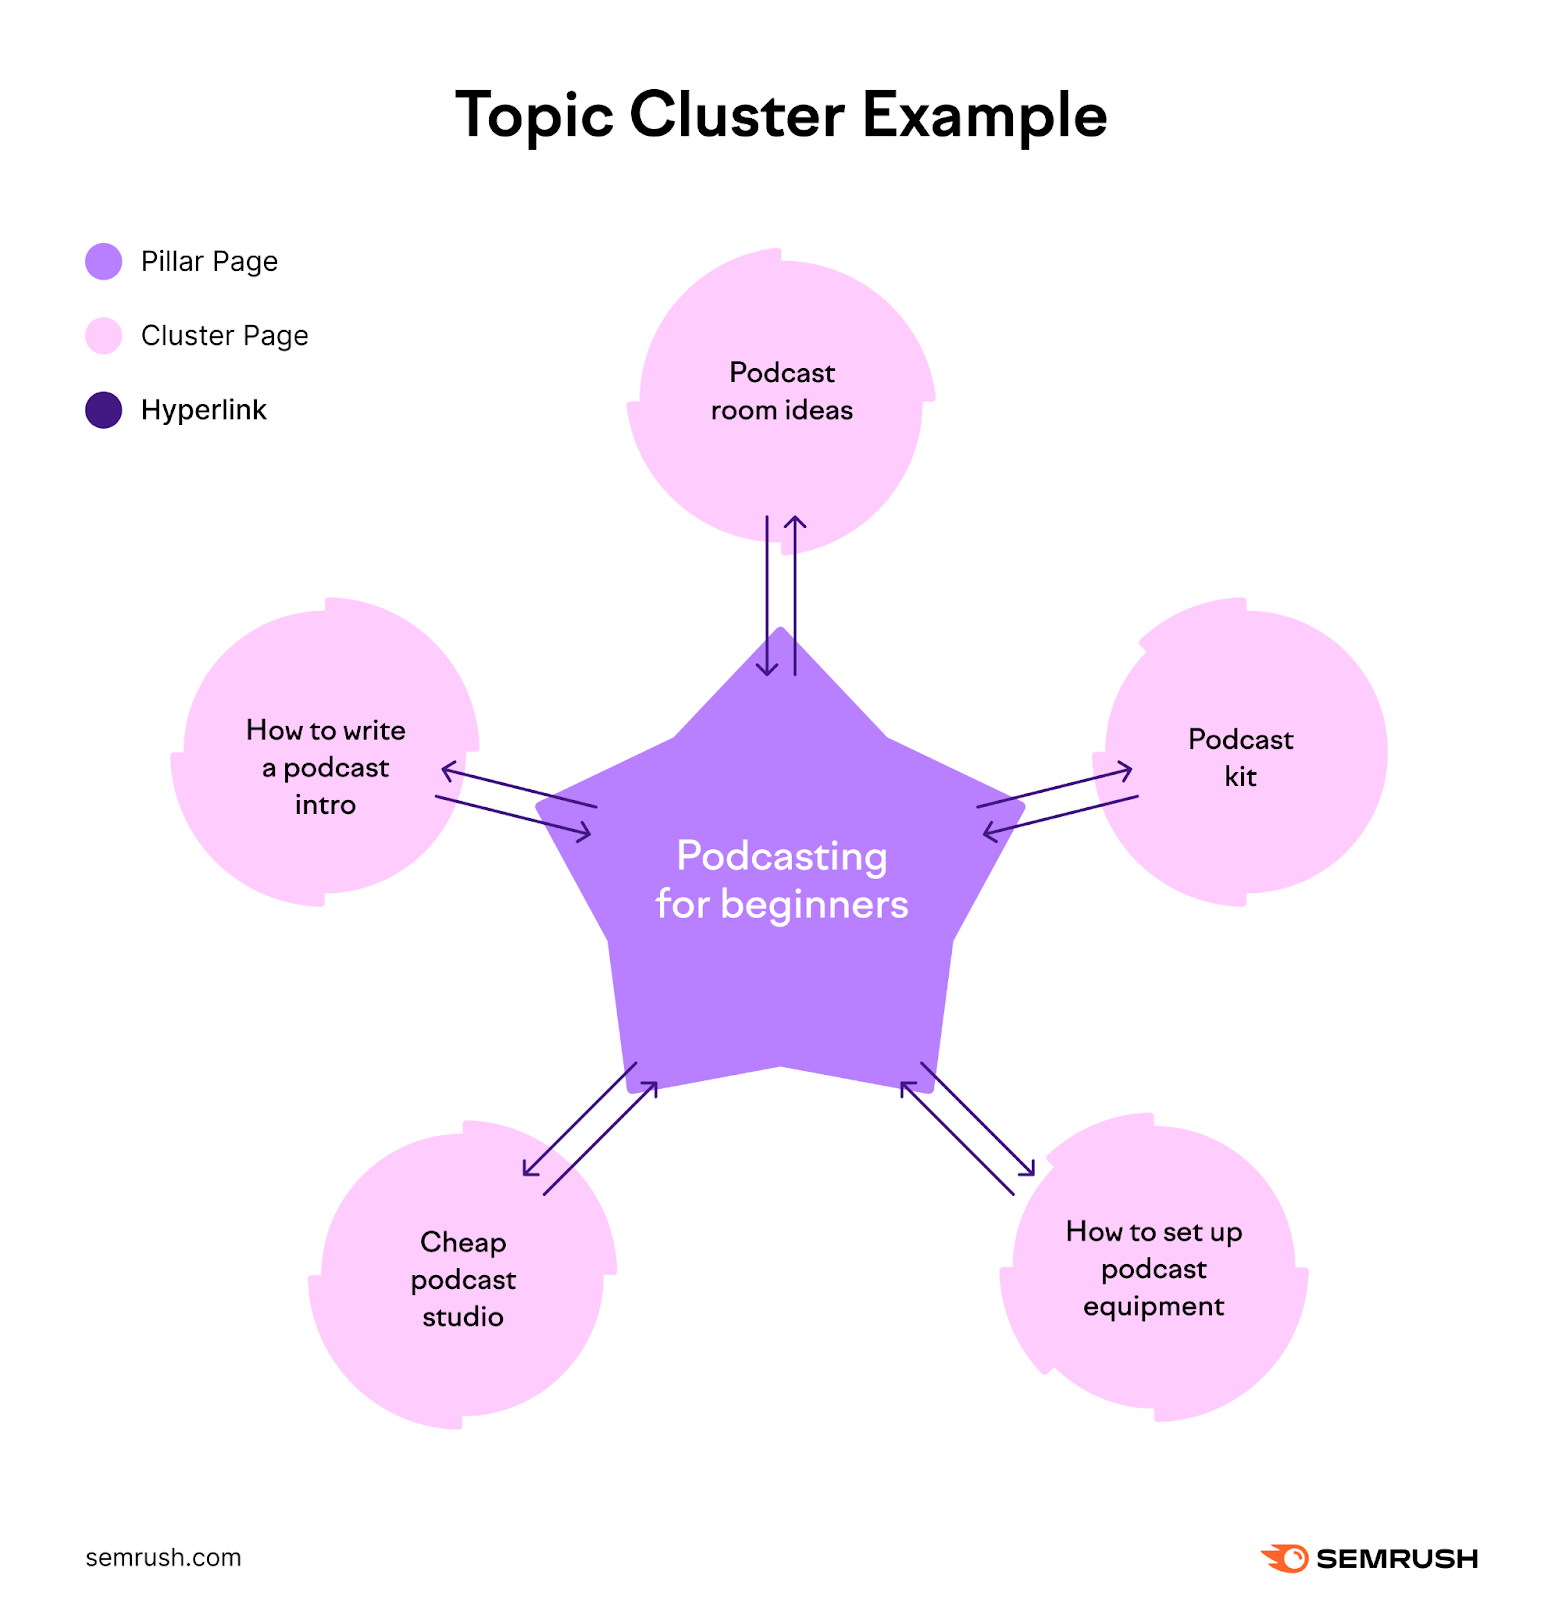 Diagram titled "Topic Cluster Exemple," featuring a central node or "Pillar Page" linked to six nodes or "Cluster Pages."